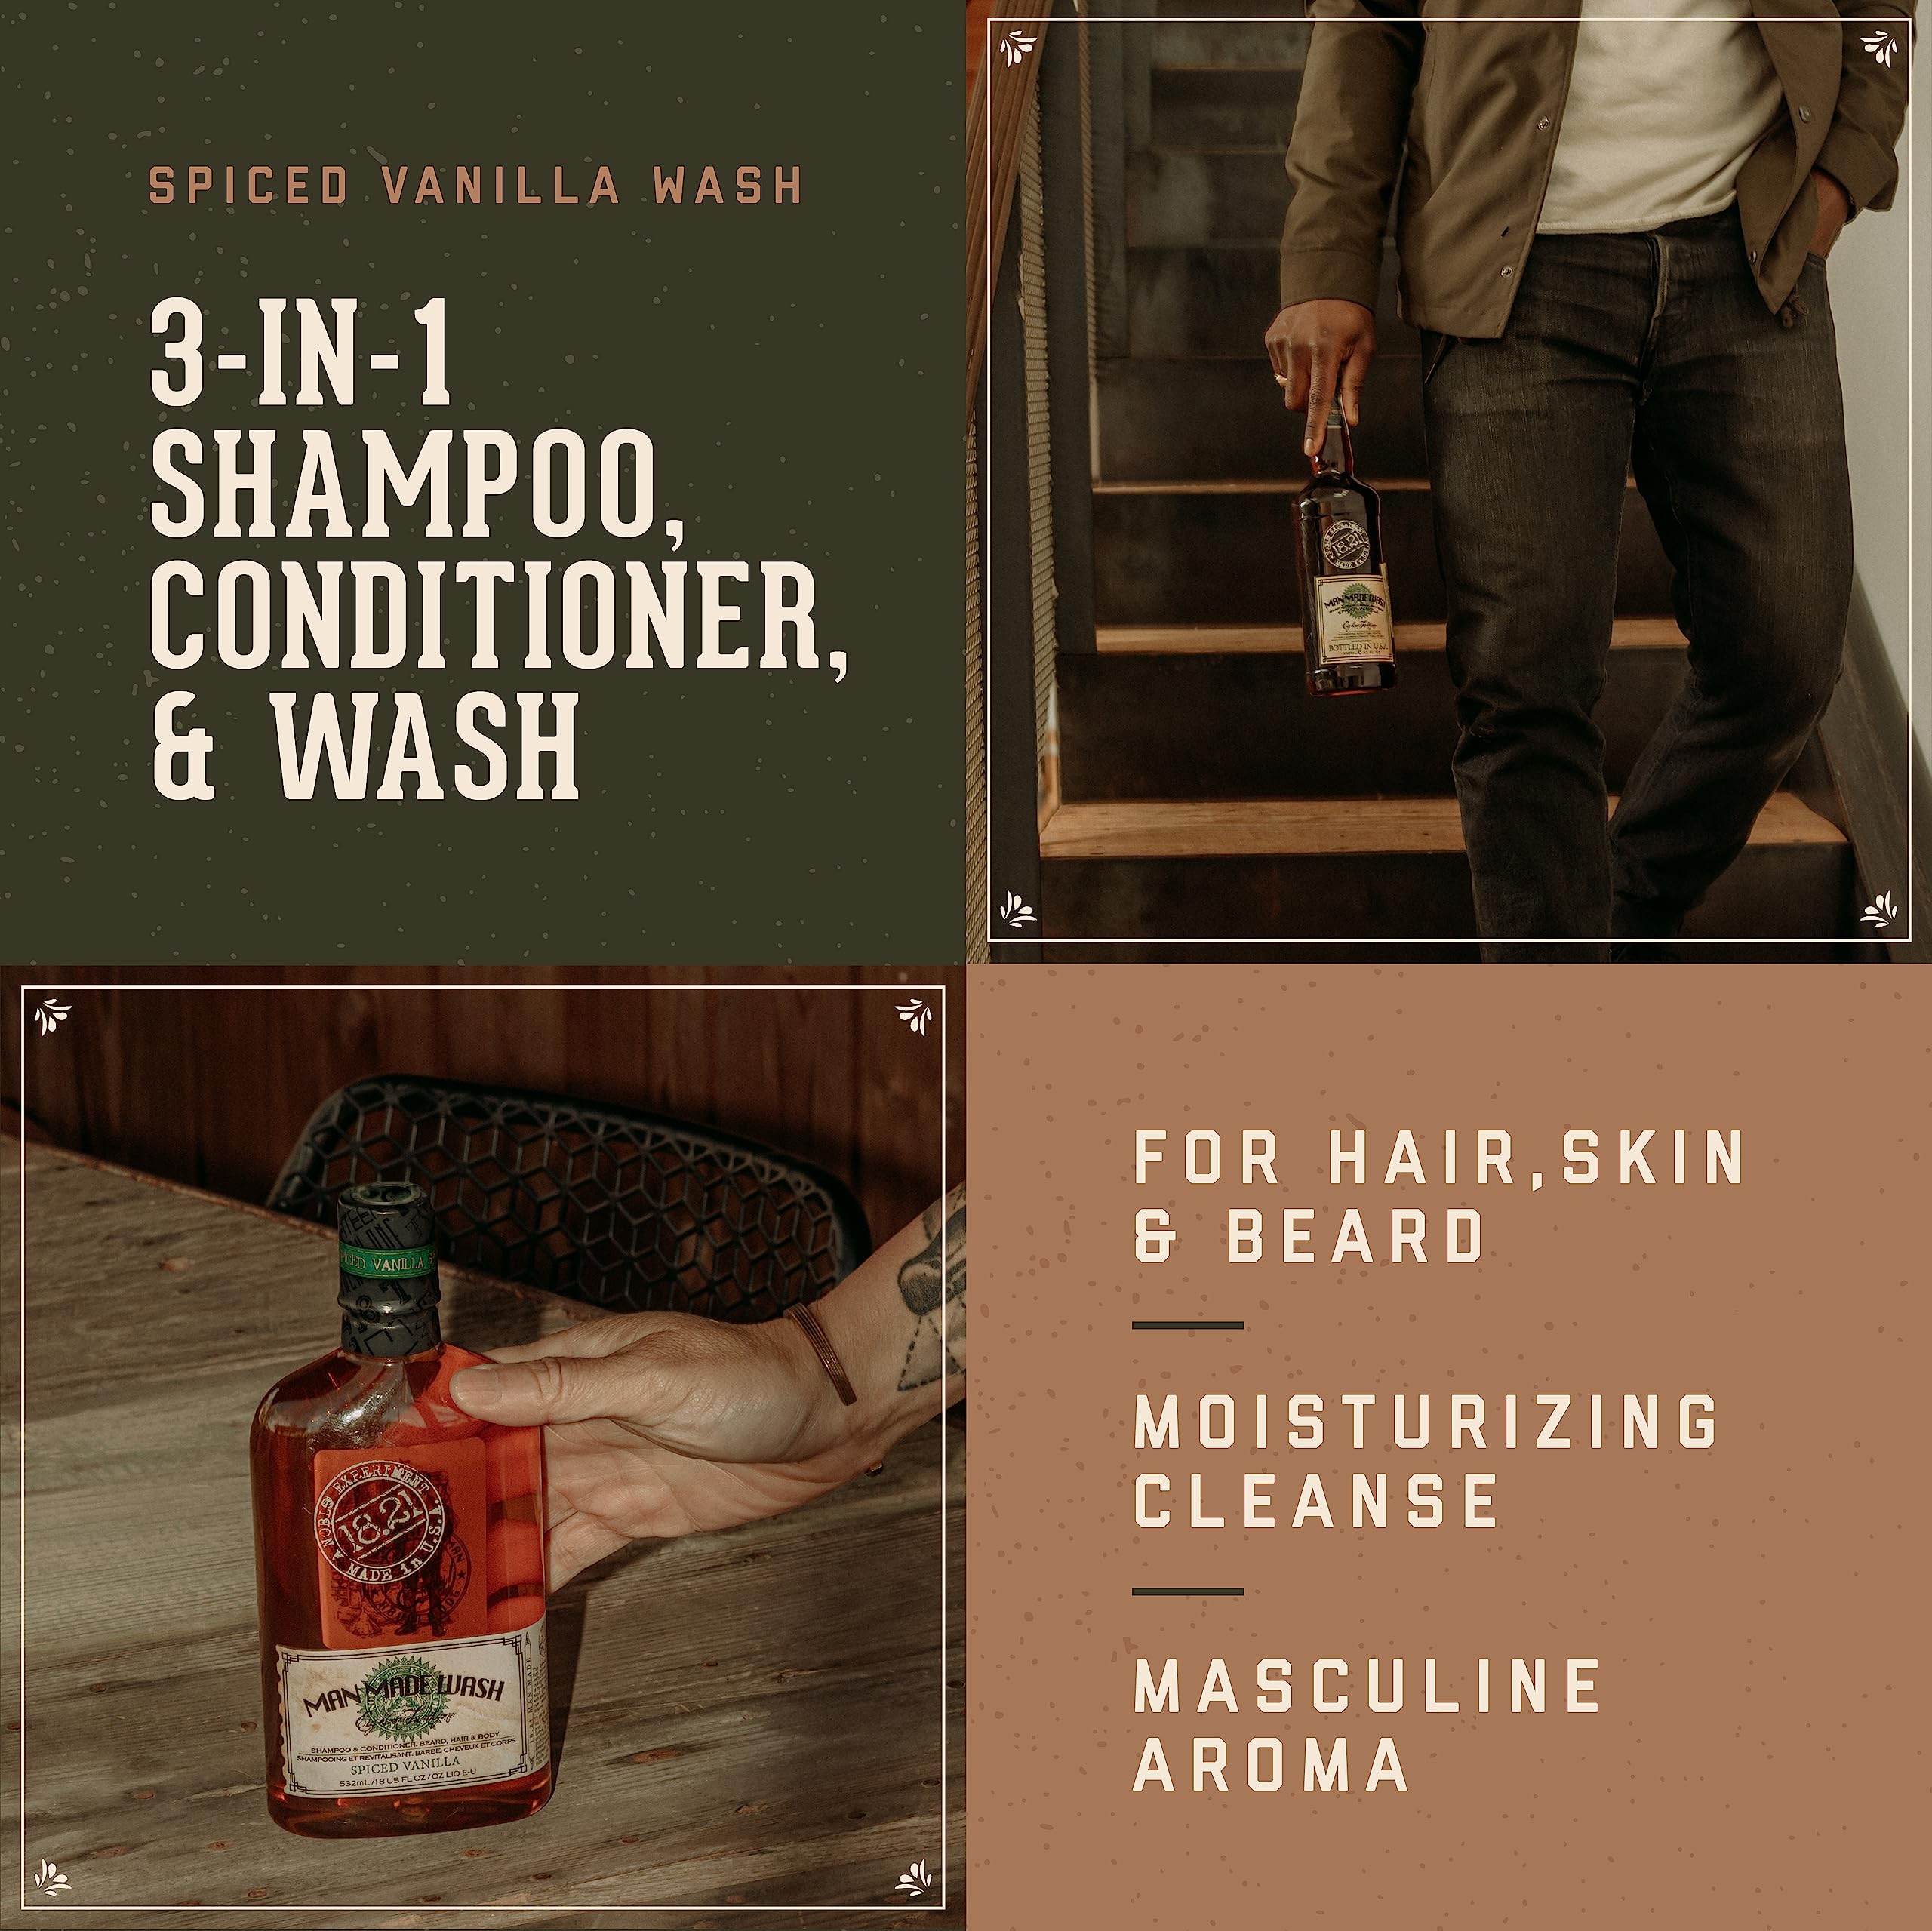 18.21 Man Made Original 3-in-1 Body Wash, Shampoo, & Conditioner for Men, All Hair & Skin Types, Strengthens and Moisturizes in a Manly Aroma